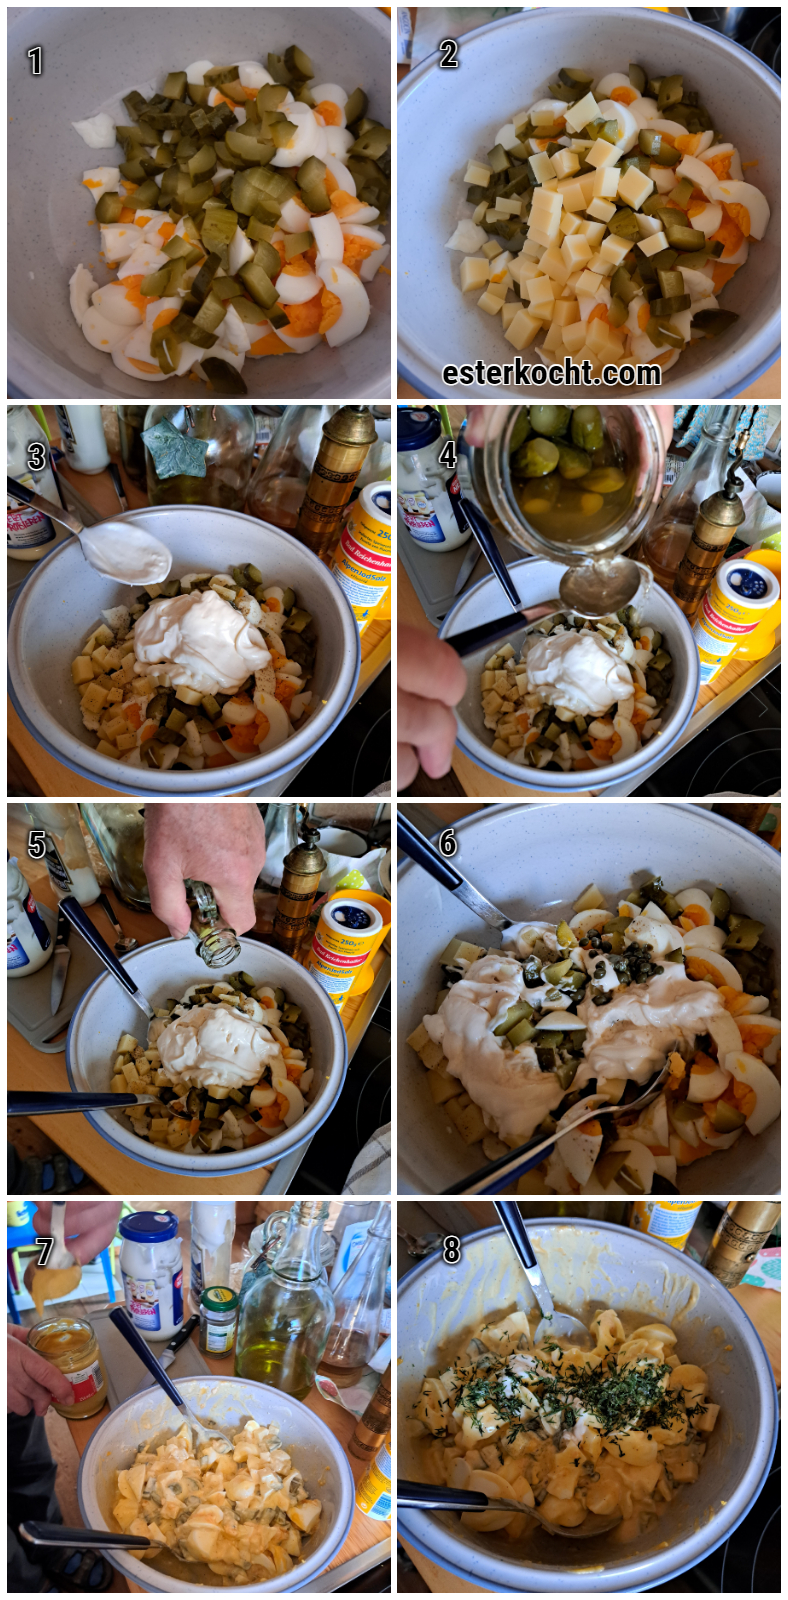 Photo sequence demonstrating the preparation of German egg salad, from chopping hard-boiled eggs to adding capers, pickles, pickle brine,  cheese, mustard, mayo, miracle whip, and dill, and finally presenting the finished dish in a serving bowl.